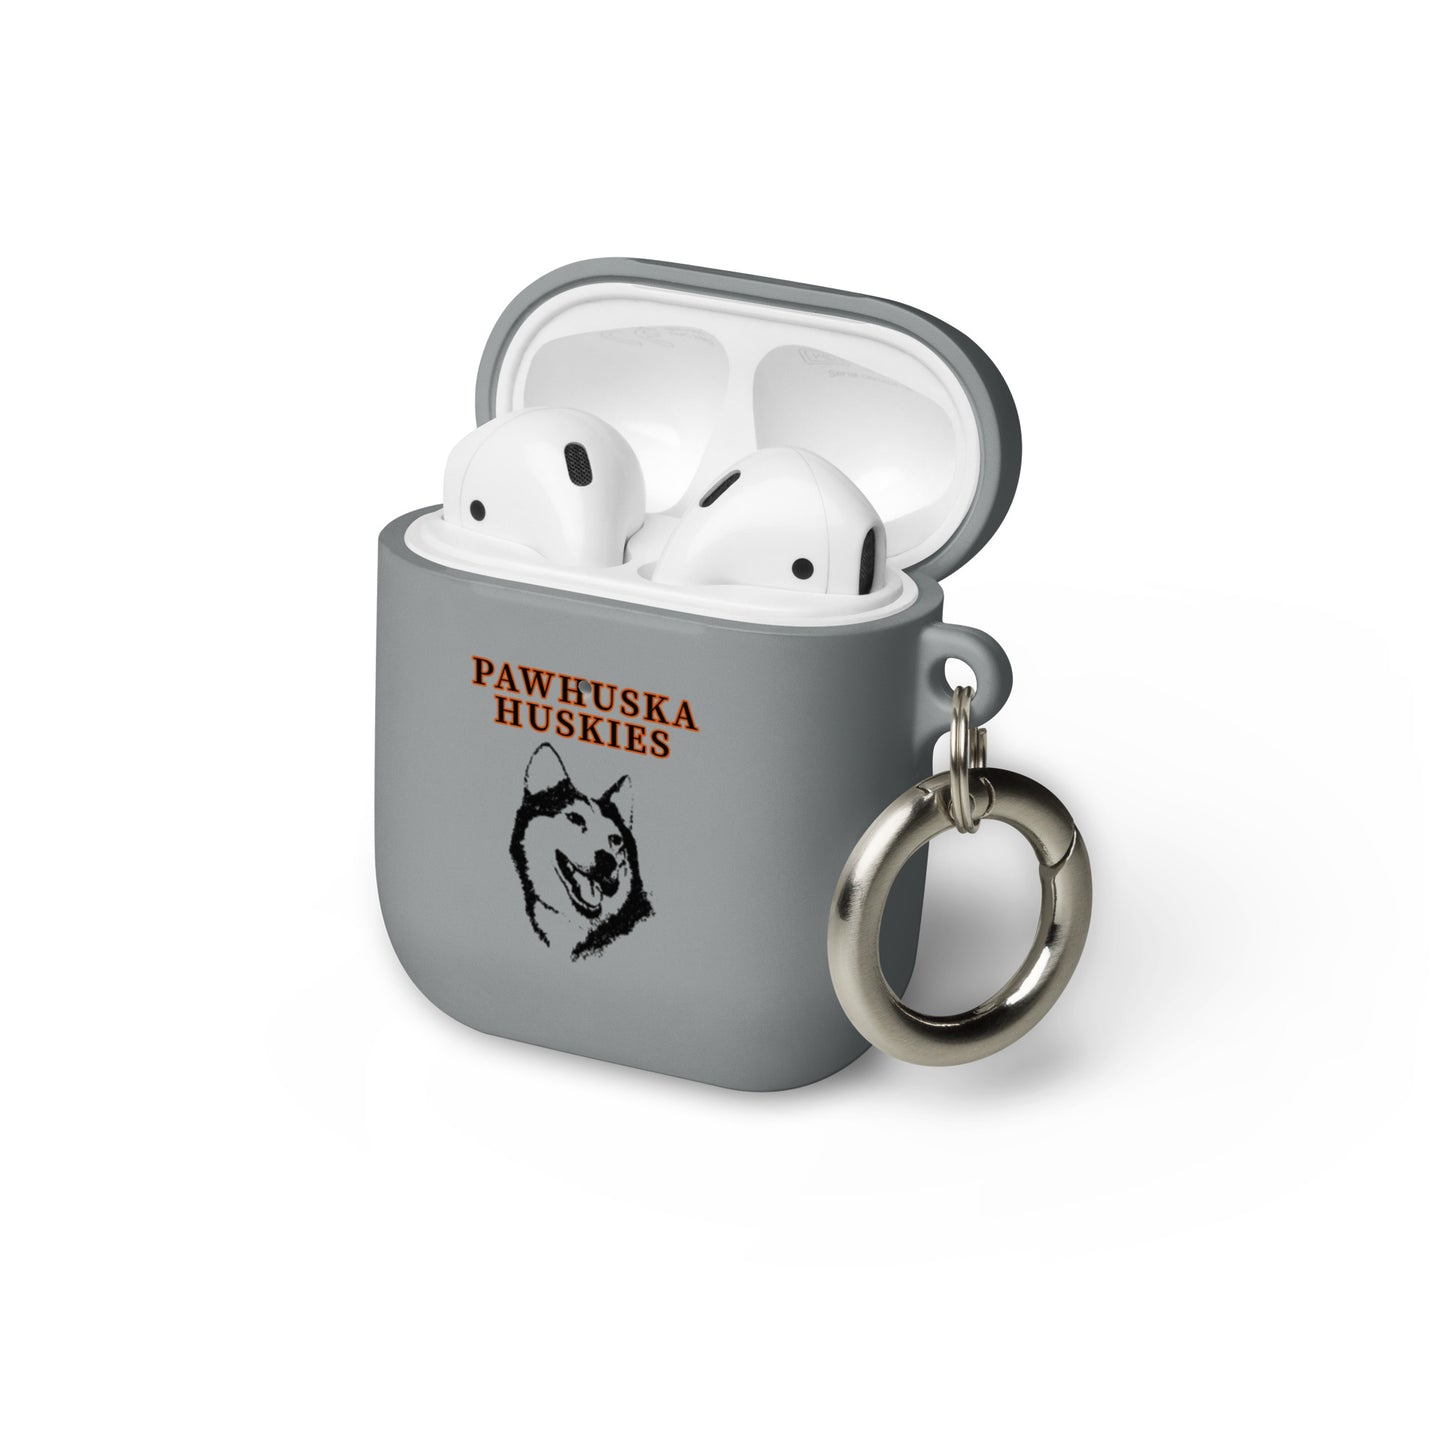 Huskies AirPods case - 2 colors!